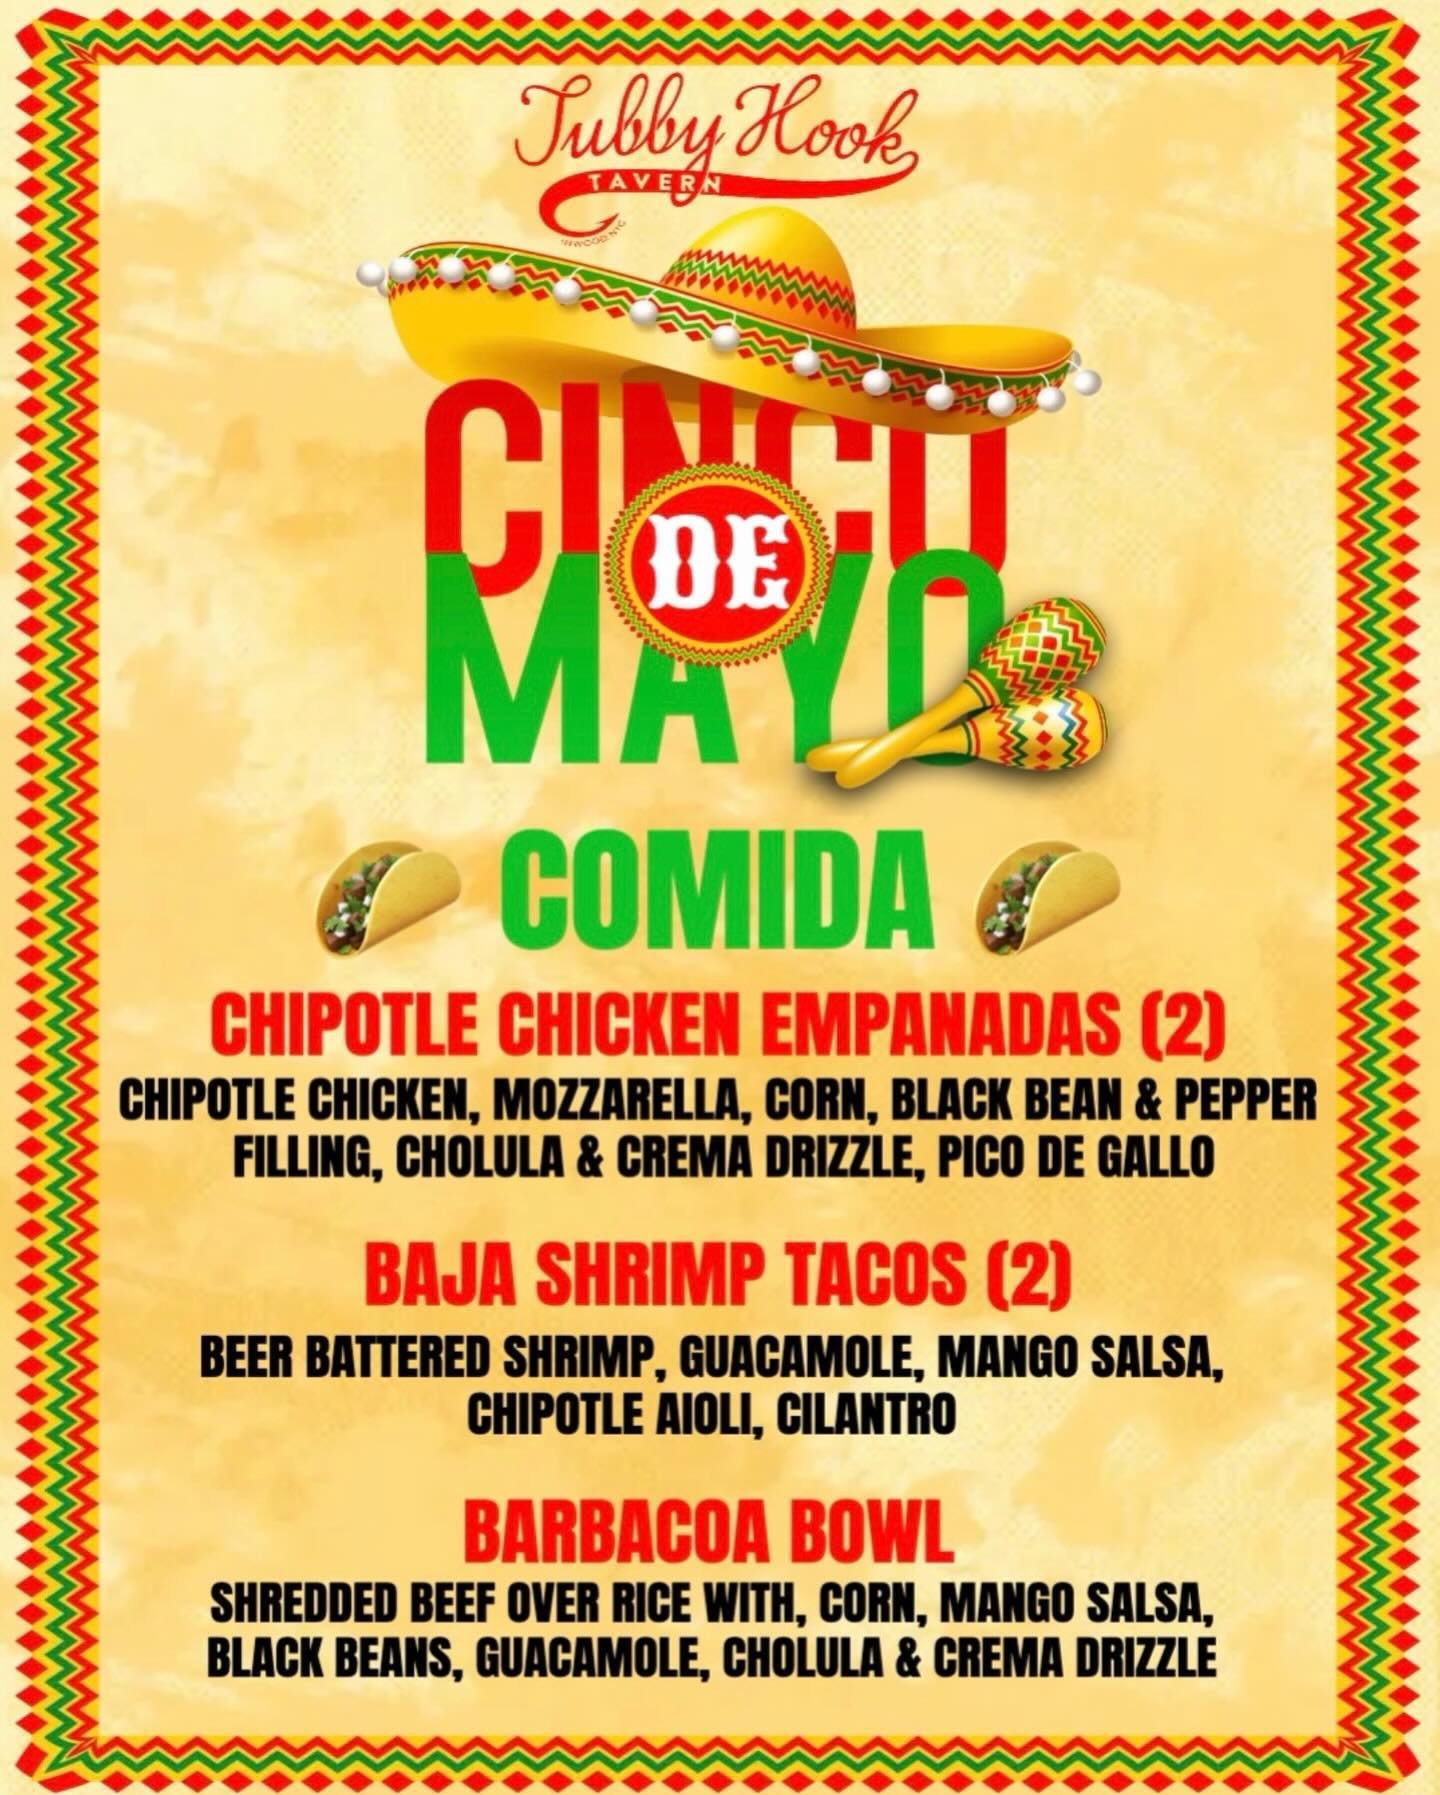 🌮🍹🎉 It&rsquo;s that time of the year again, folks! Cinco de Mayo is upon us, and you know what that means - it&rsquo;s time to indulge in some mouth-watering Mexican food and refreshing drinks! Cinco De Mayo Specials running all week long, April 2